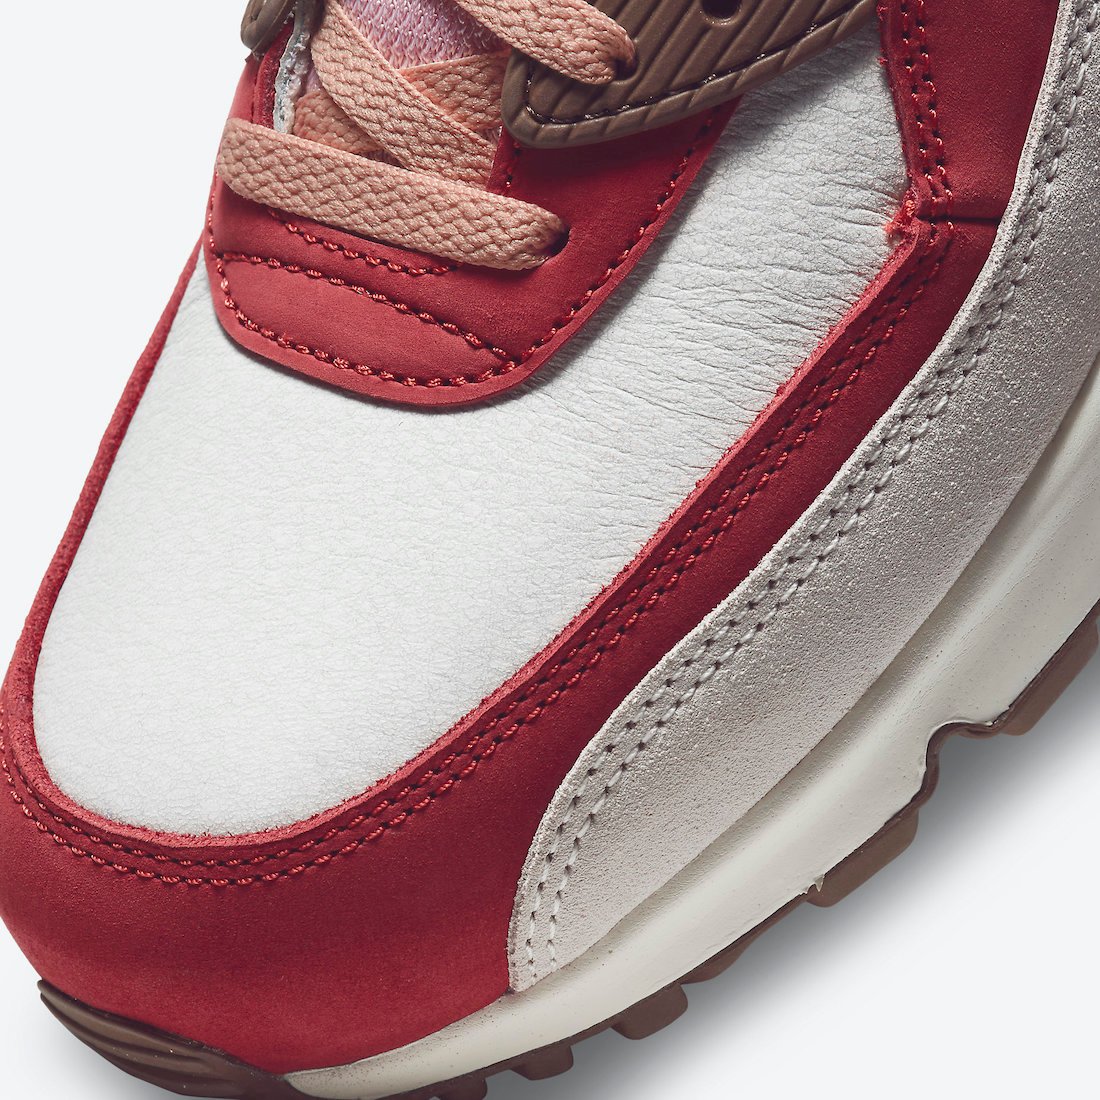 Nike Air Max 90 Bacon CU1816-100 Release Info Price